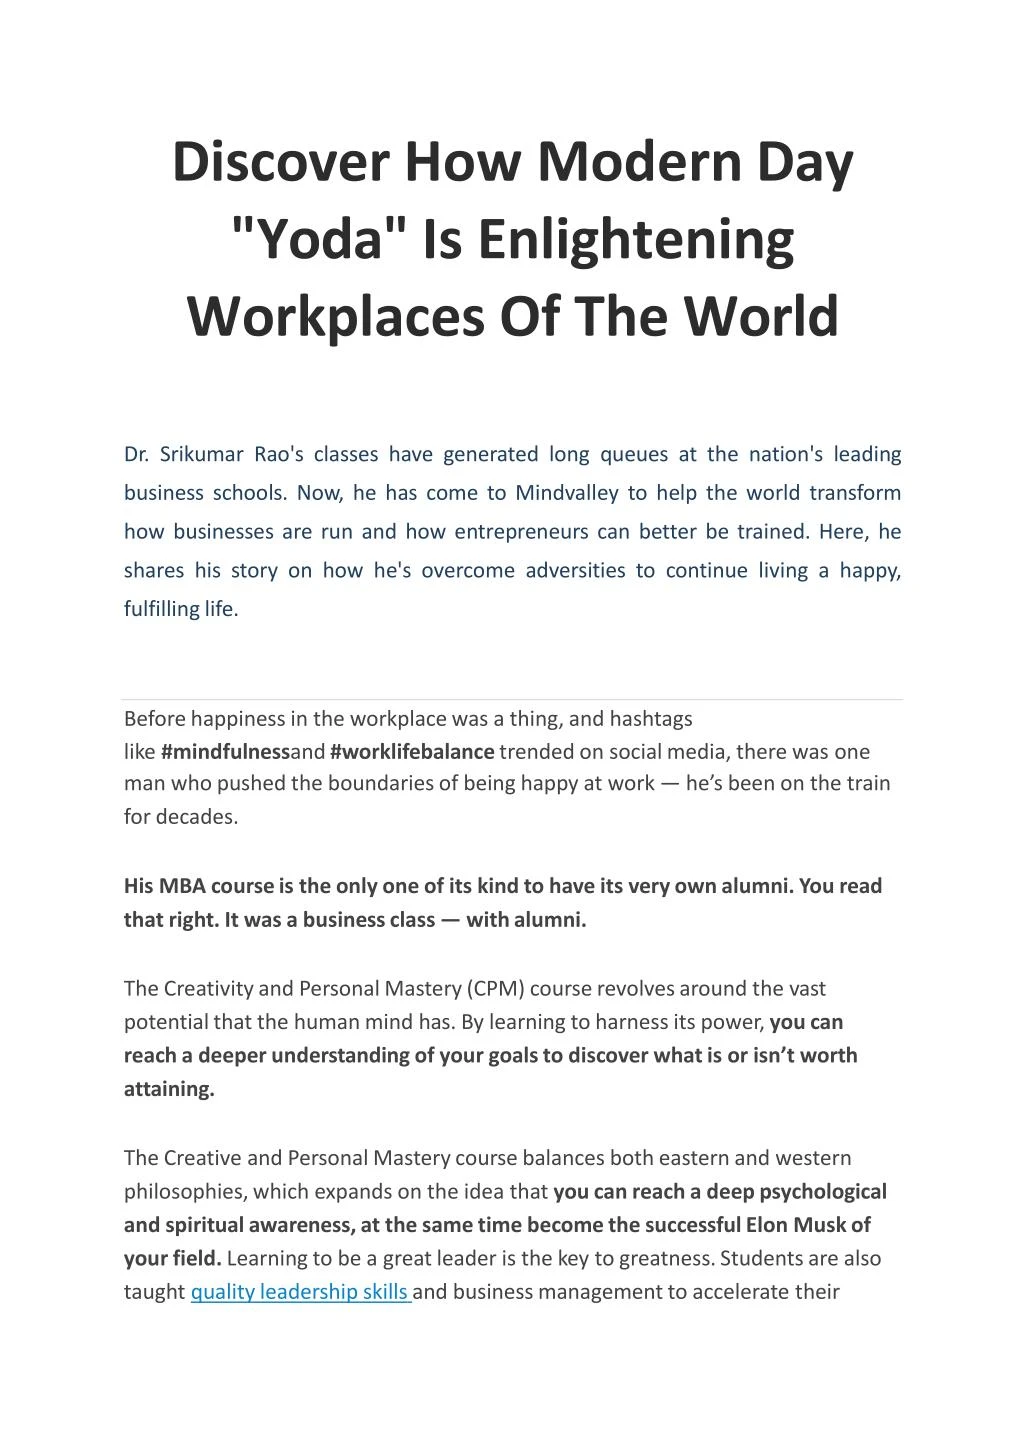 discover how modern day yoda is enlightening workplaces of the world